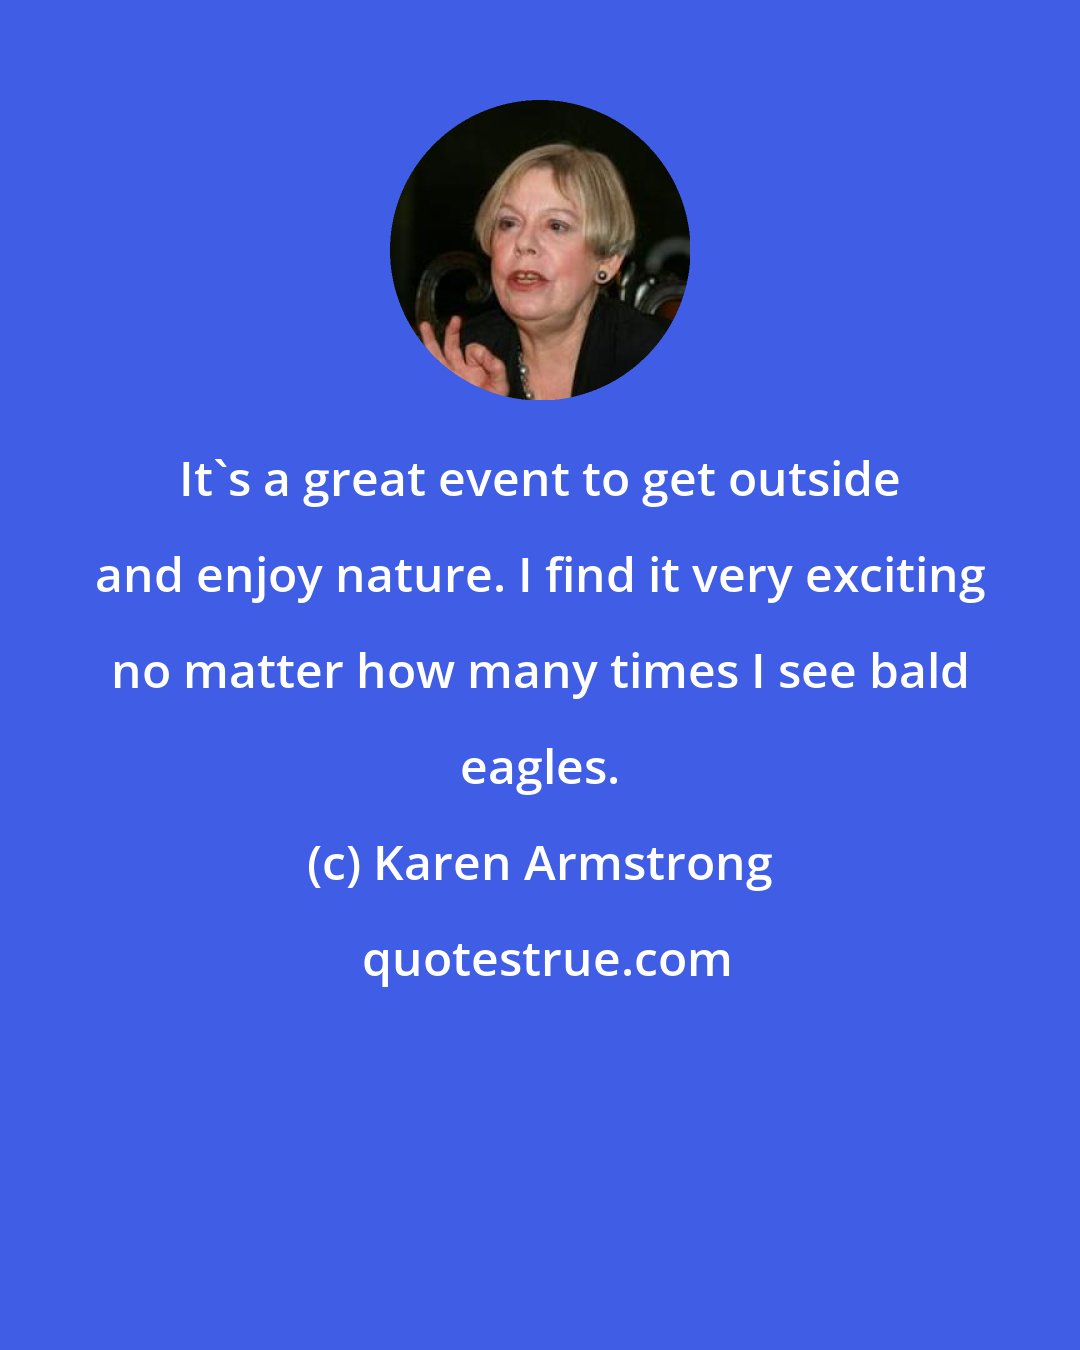 Karen Armstrong: It's a great event to get outside and enjoy nature. I find it very exciting no matter how many times I see bald eagles.